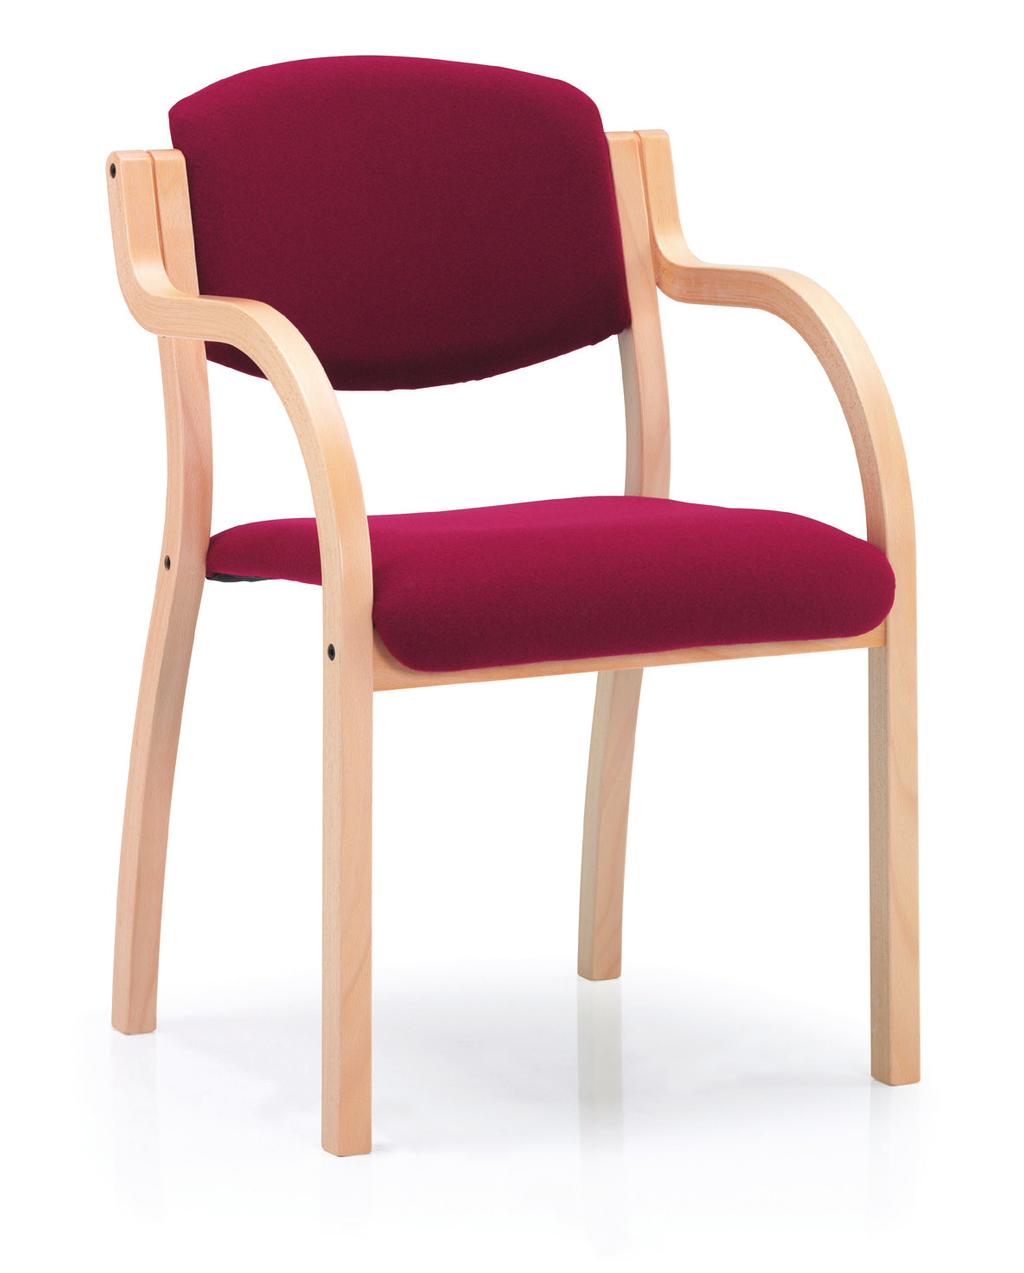 The range includes stacking and low reception chair models with matching table and stool options available.